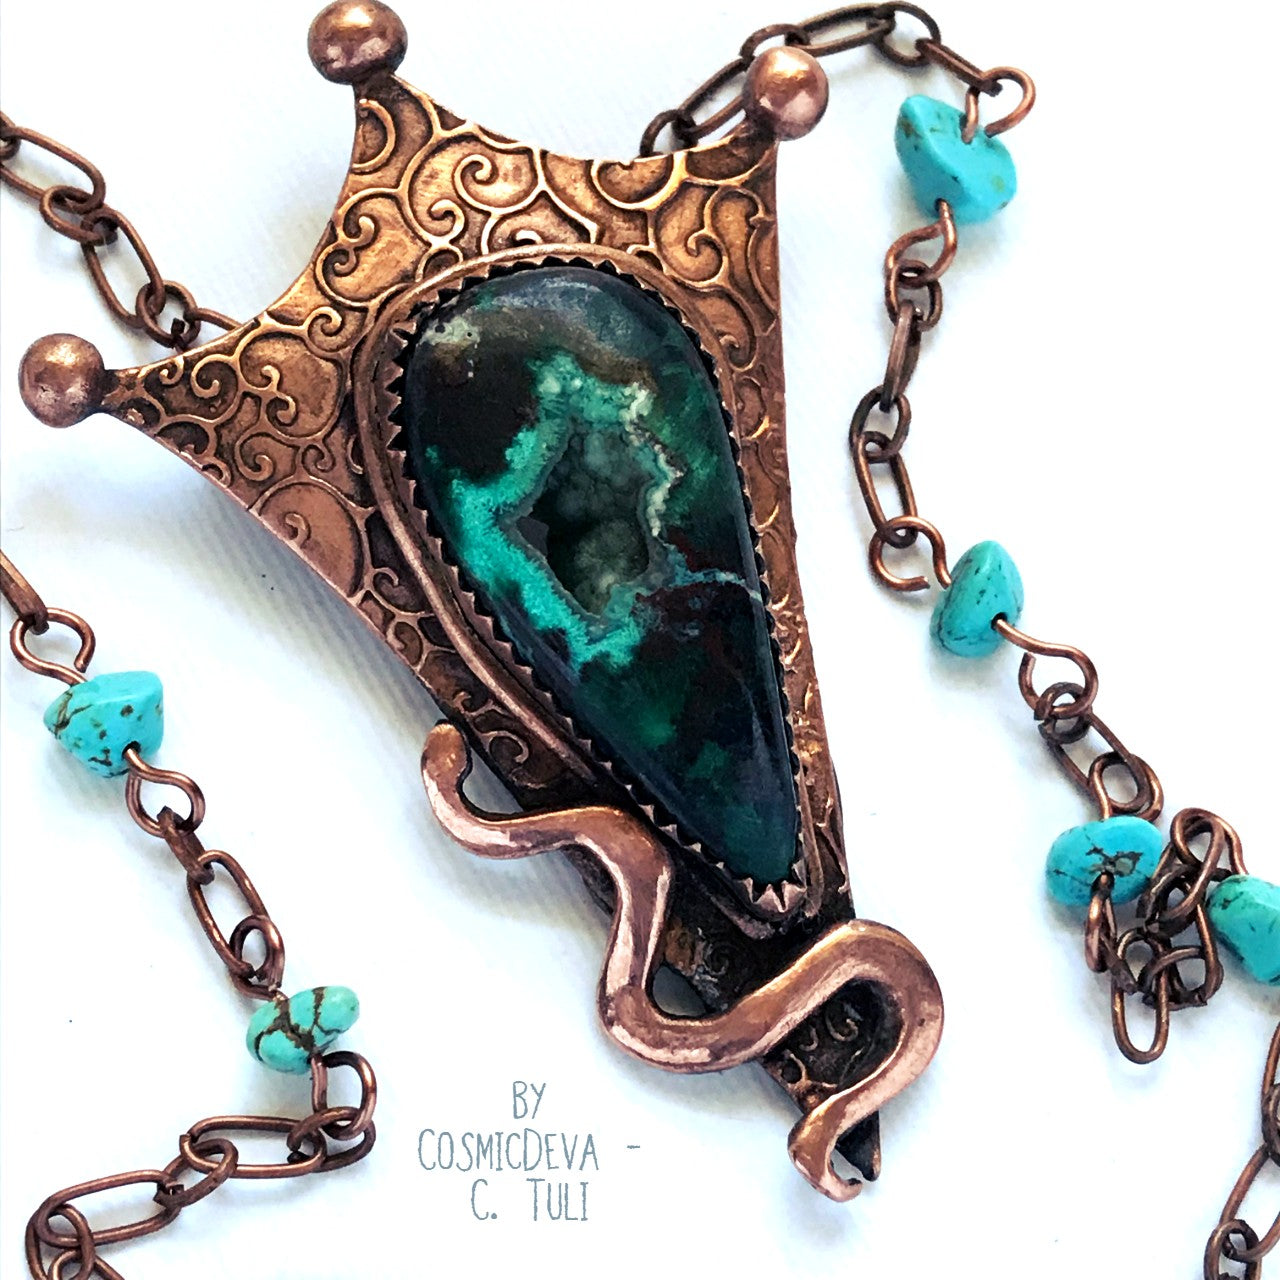 Botryoidal Chrysocolla Copper Snake Pendant Necklace This unique Chrysocolla with Malachite and traces of cuprite gemstone is nestled amidst a complete hand sculptured triangle pendant with a little snake winding up in rich and warm glowing copper and has beautiful swirl texture. This rustic copper statement necklace suspends from a copper chain with natural turquoise beads. The copper jewelry piece was oxidized for a deep warm finish.- CosmicDeva